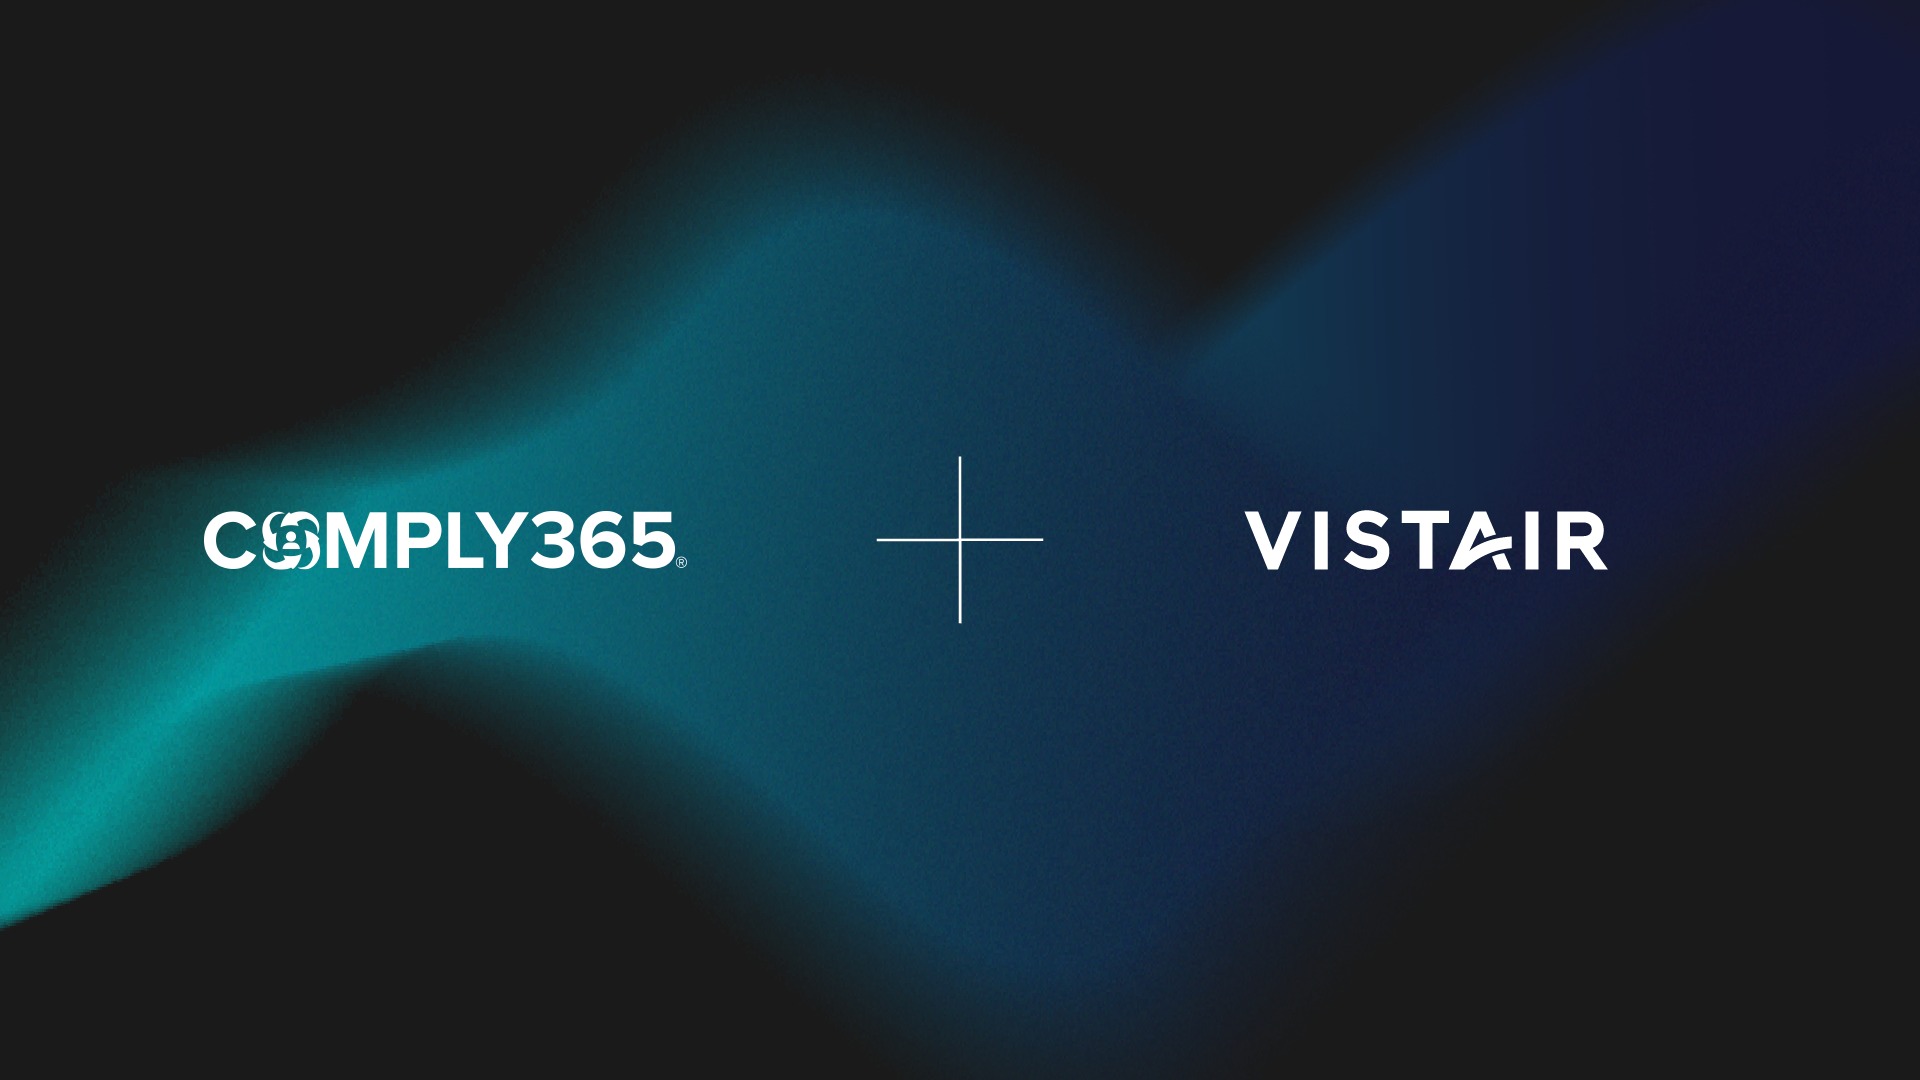 Comply365 and Vistair